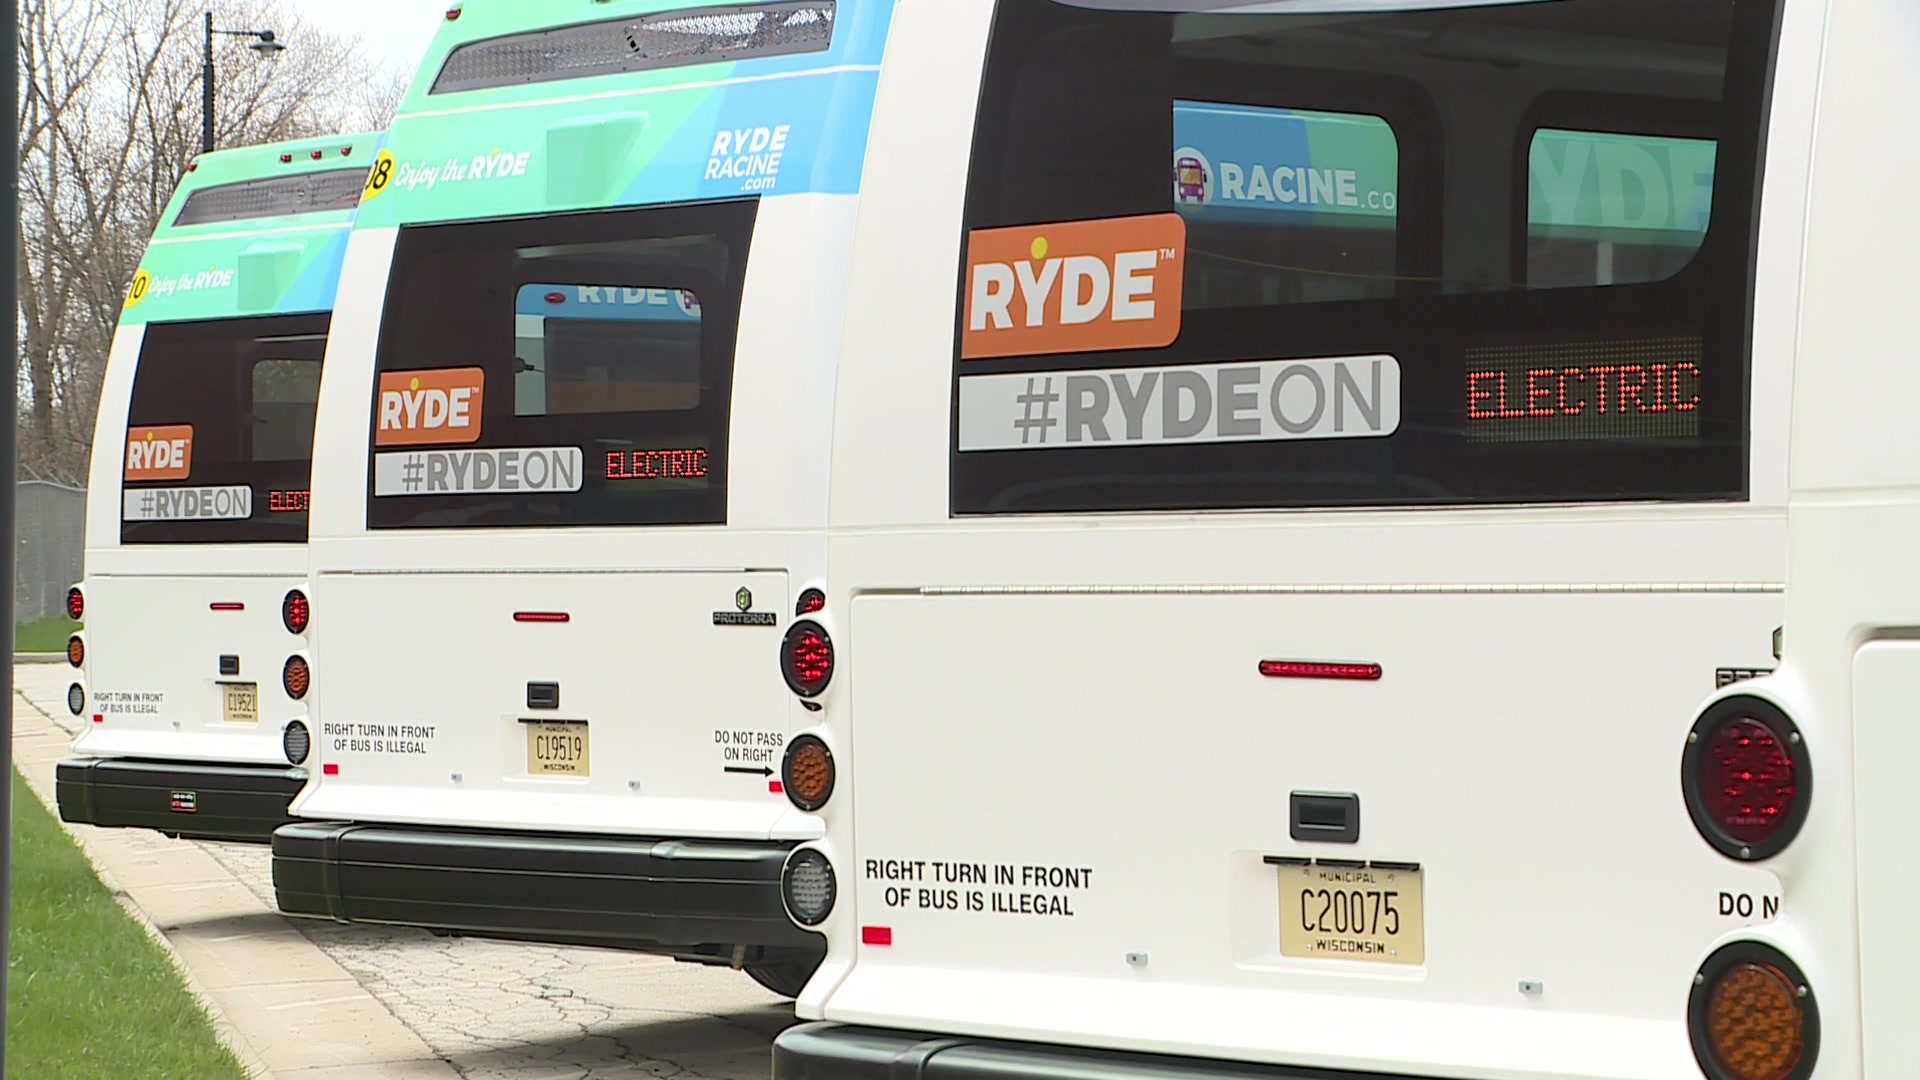 Racine awarded additional $3.8M for buses